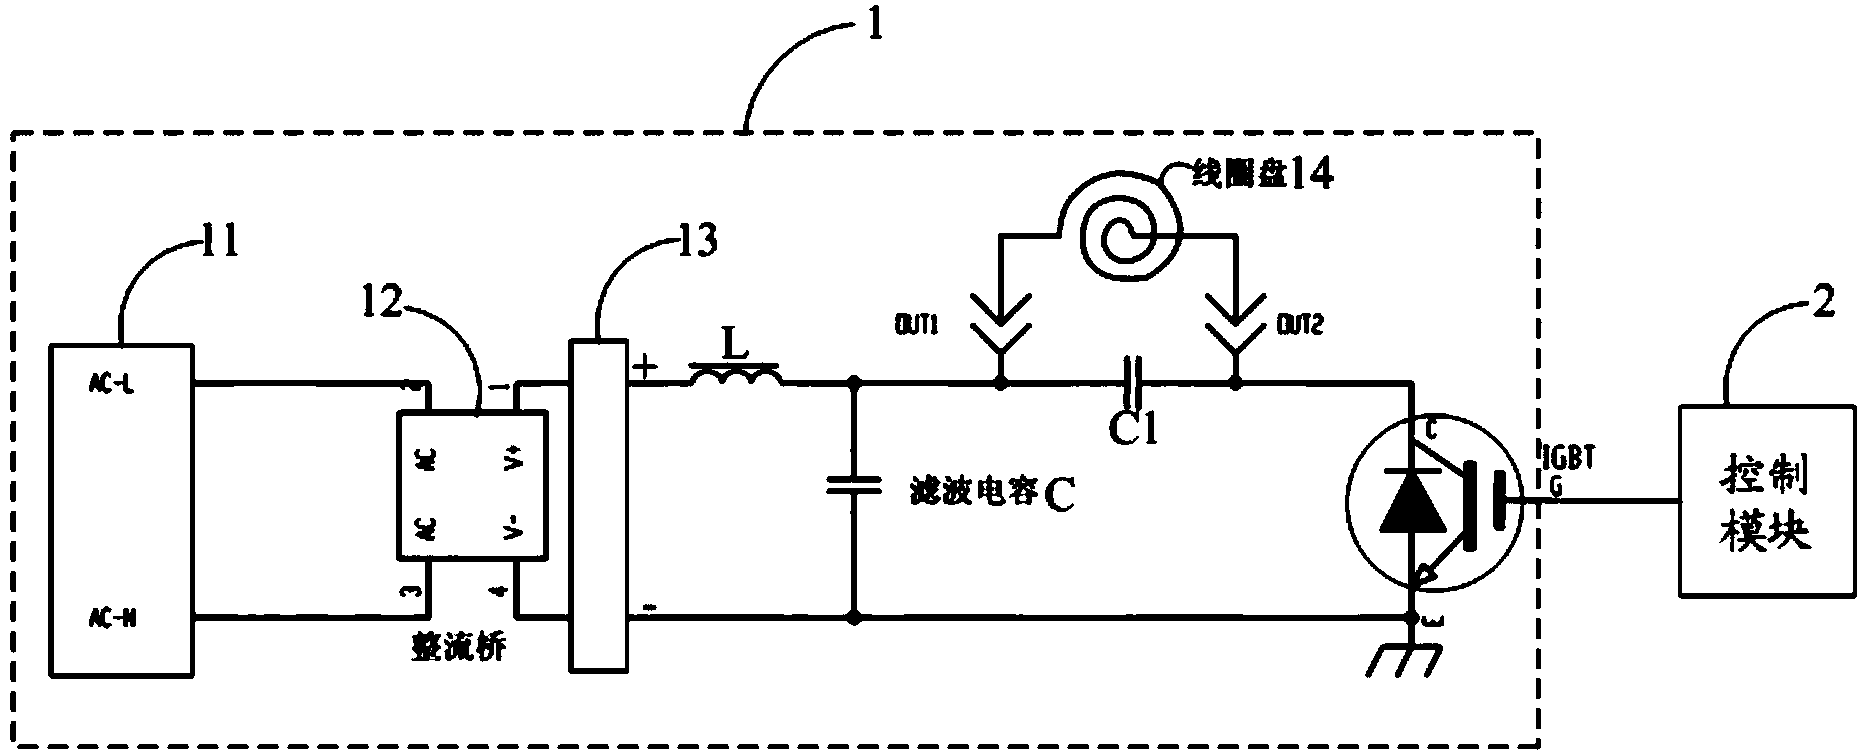 IGBT drive circuit, and electromagnetic induction heating device and method